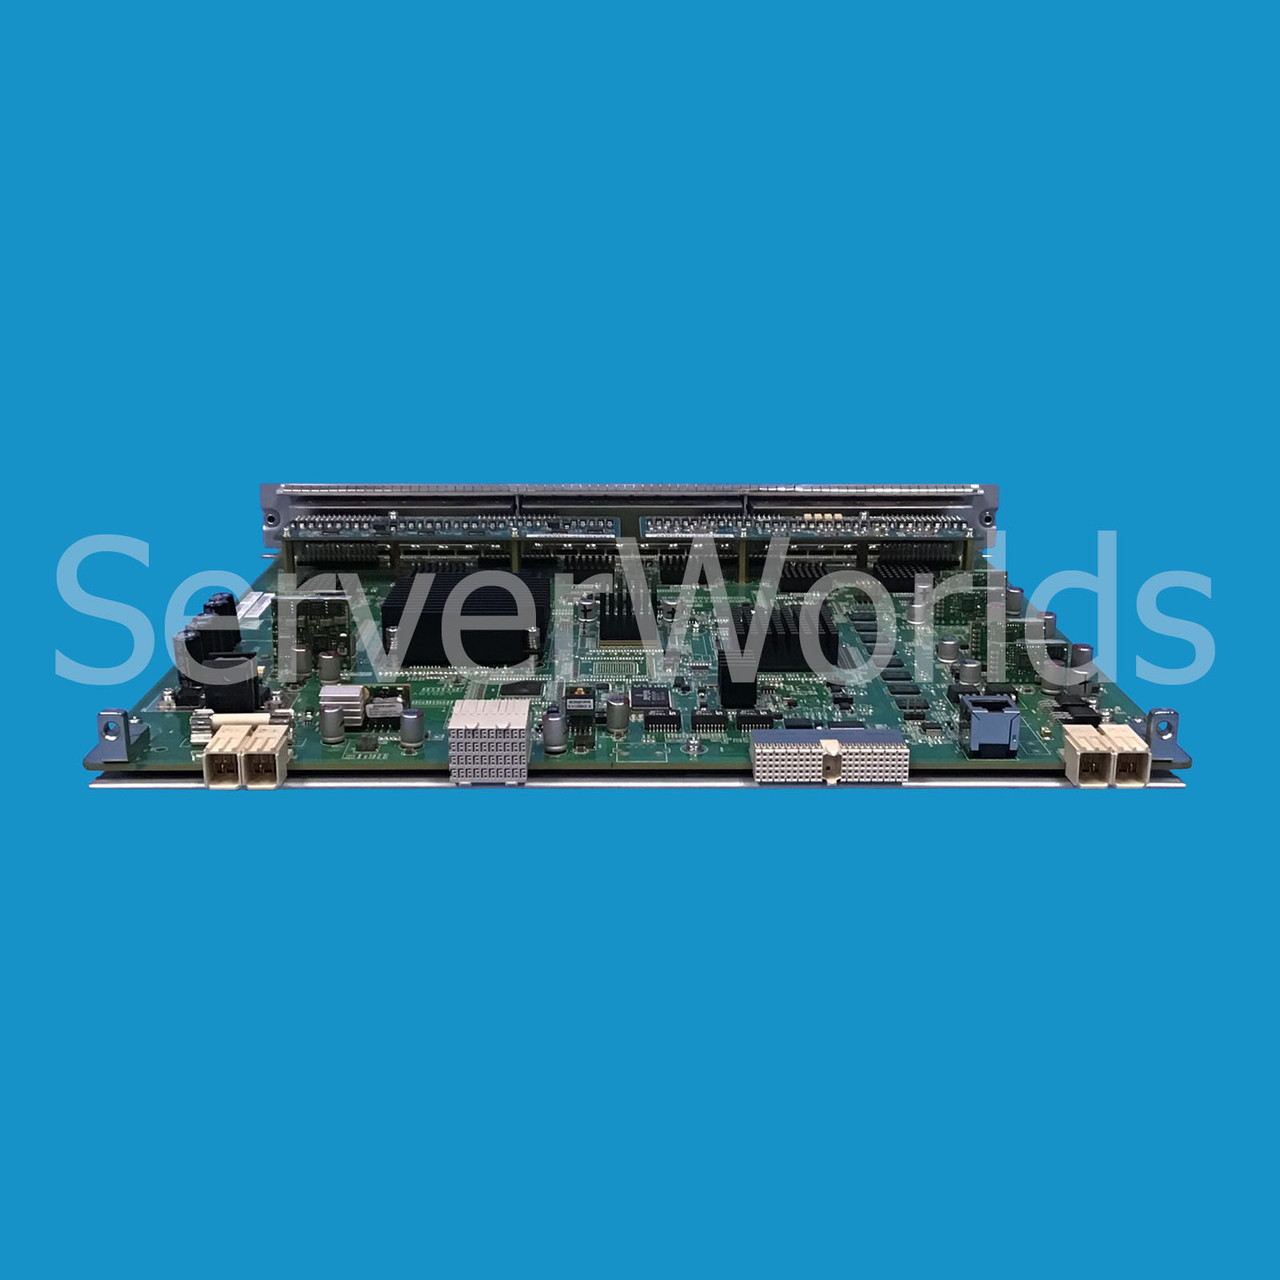 HP JD229B 7500 48P GIG-T POE+ Extended Module